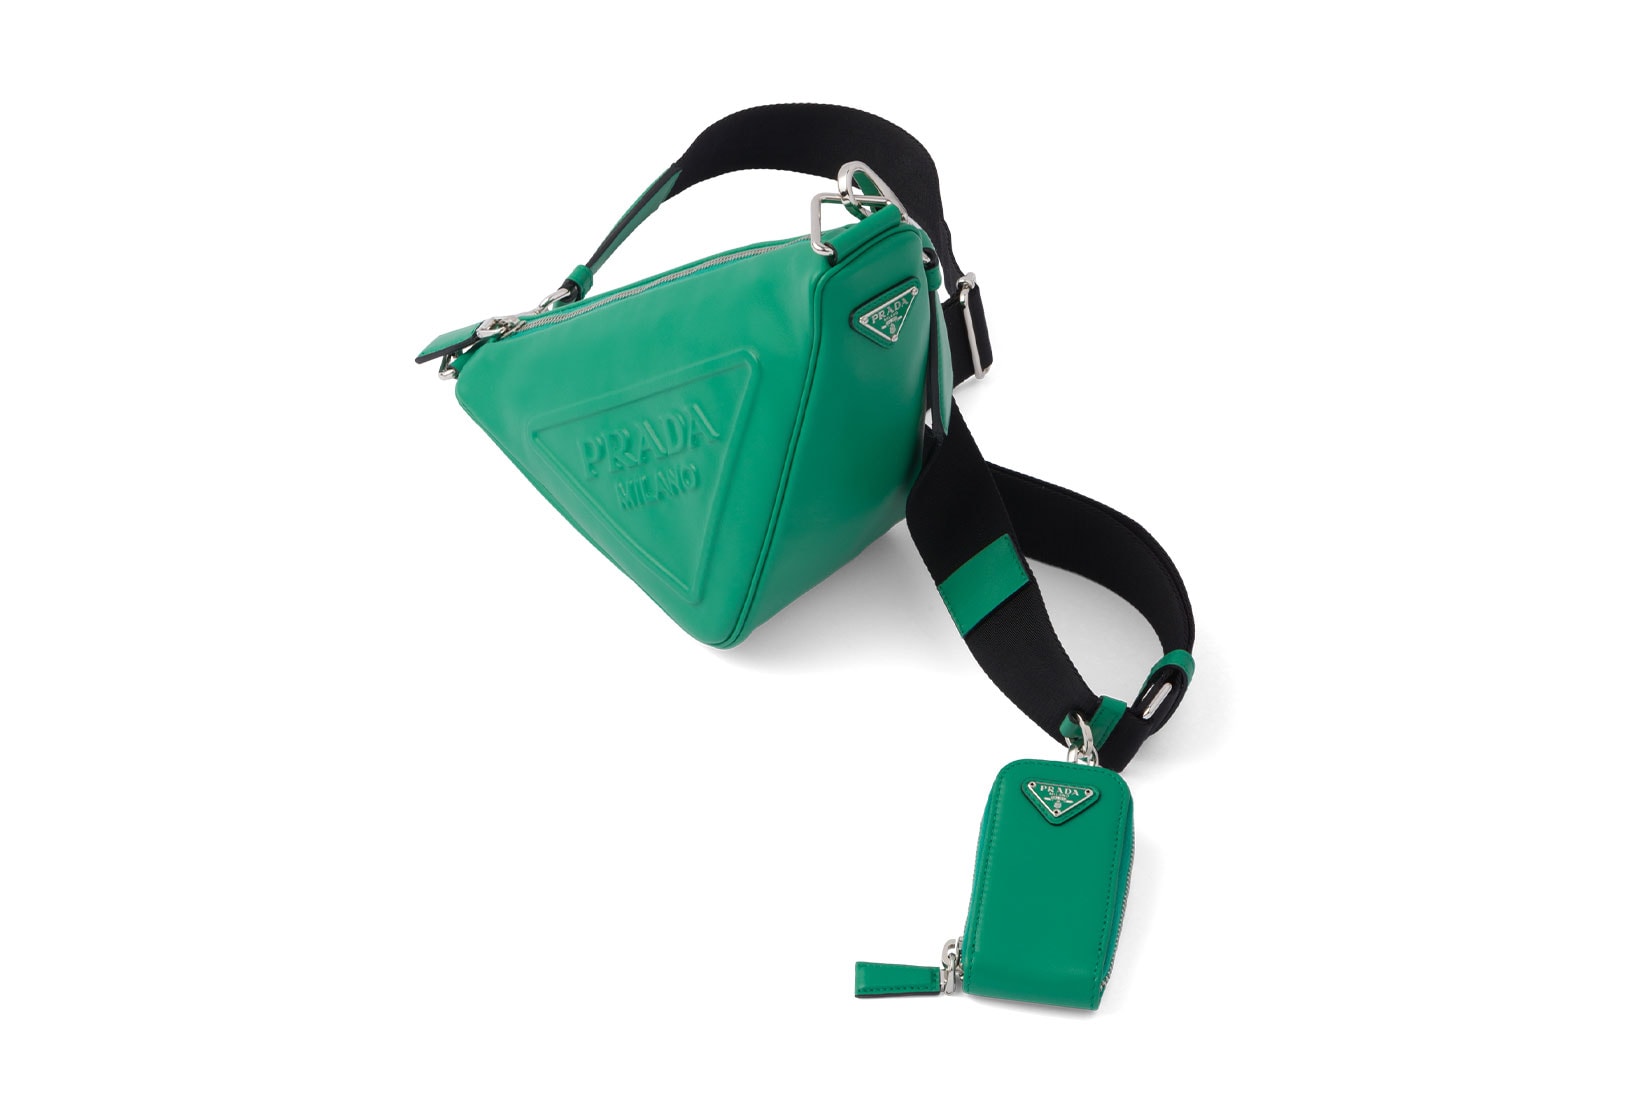 We're Swooning Over This New Prada Triangle Bag